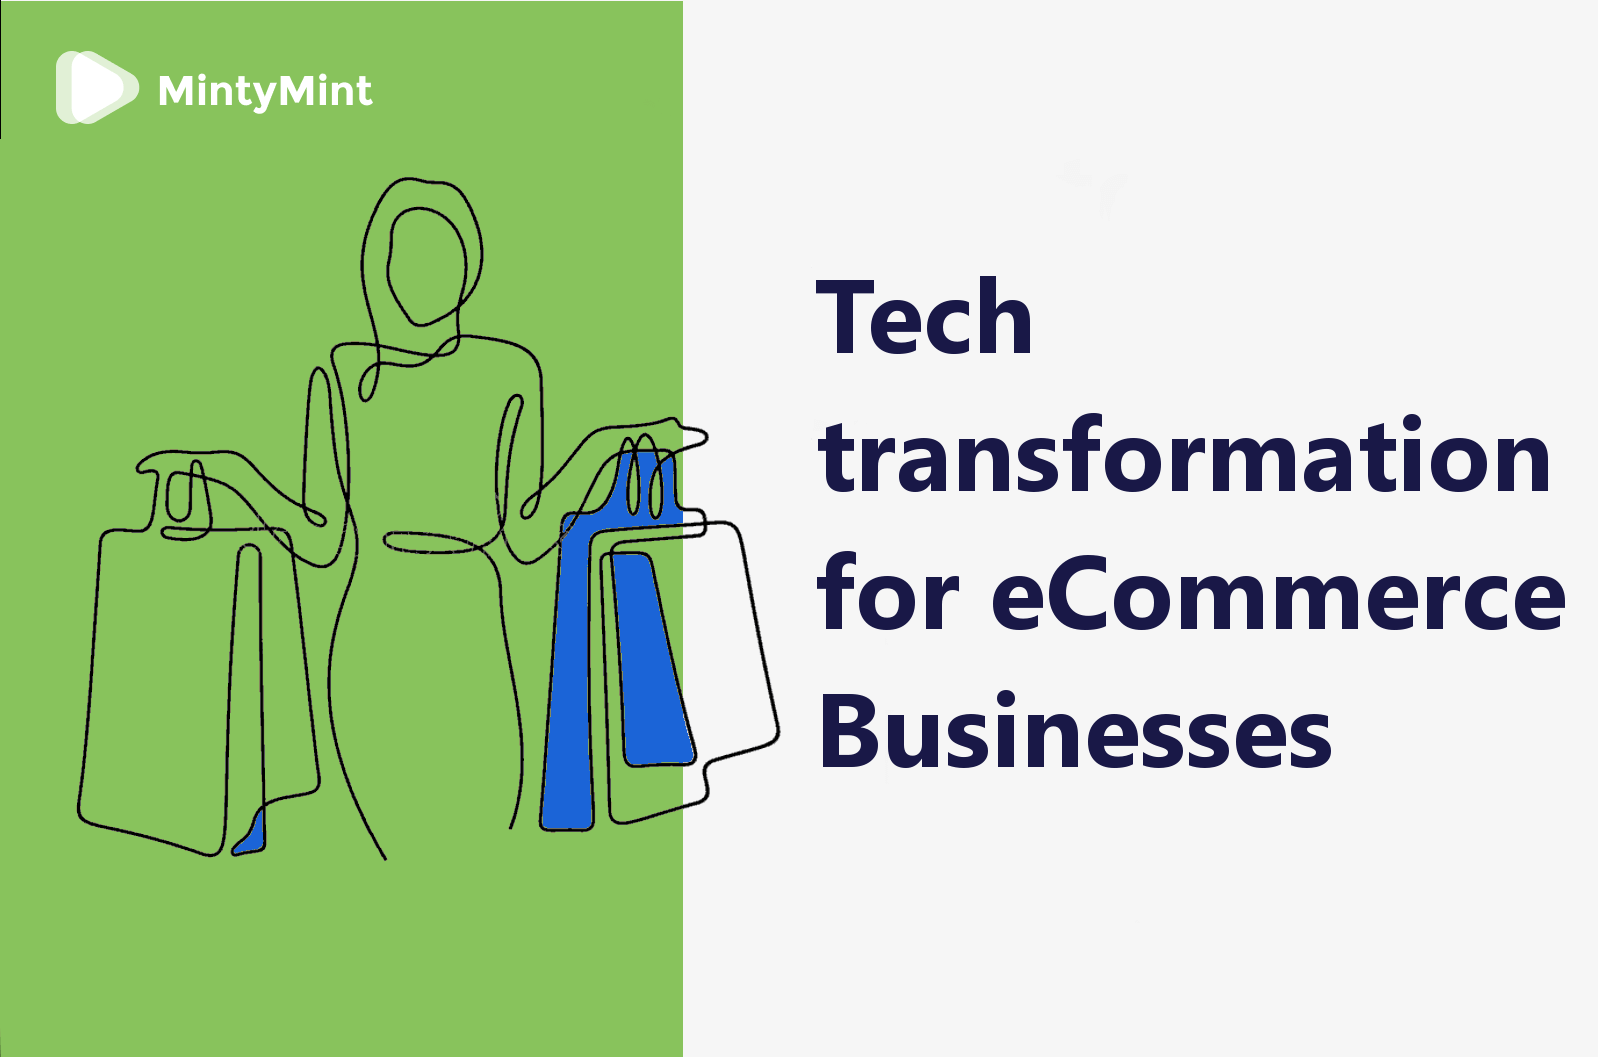 Tech transformation for eCommerce Businesses